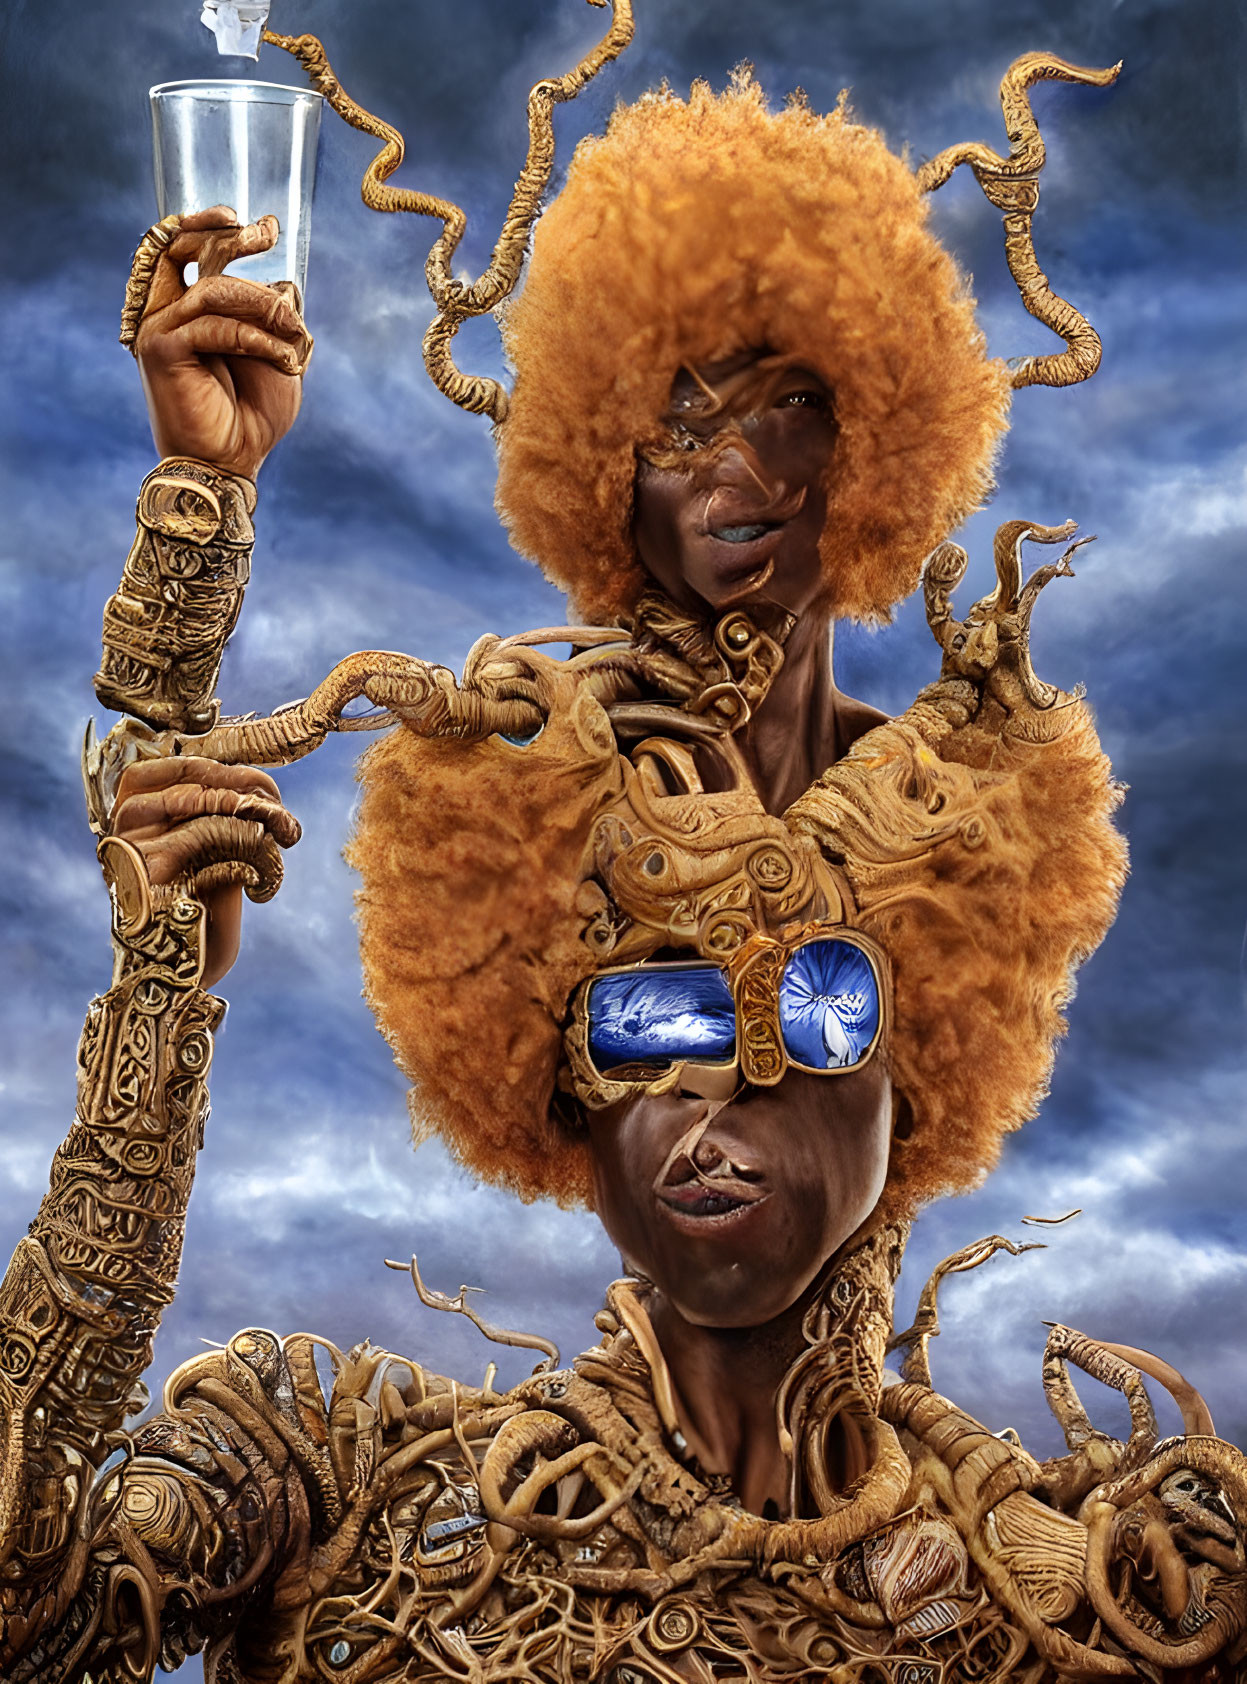 Person with Afro and Blue Mirrored Sunglasses Surrounded by Golden Snakes holding Clear Glass